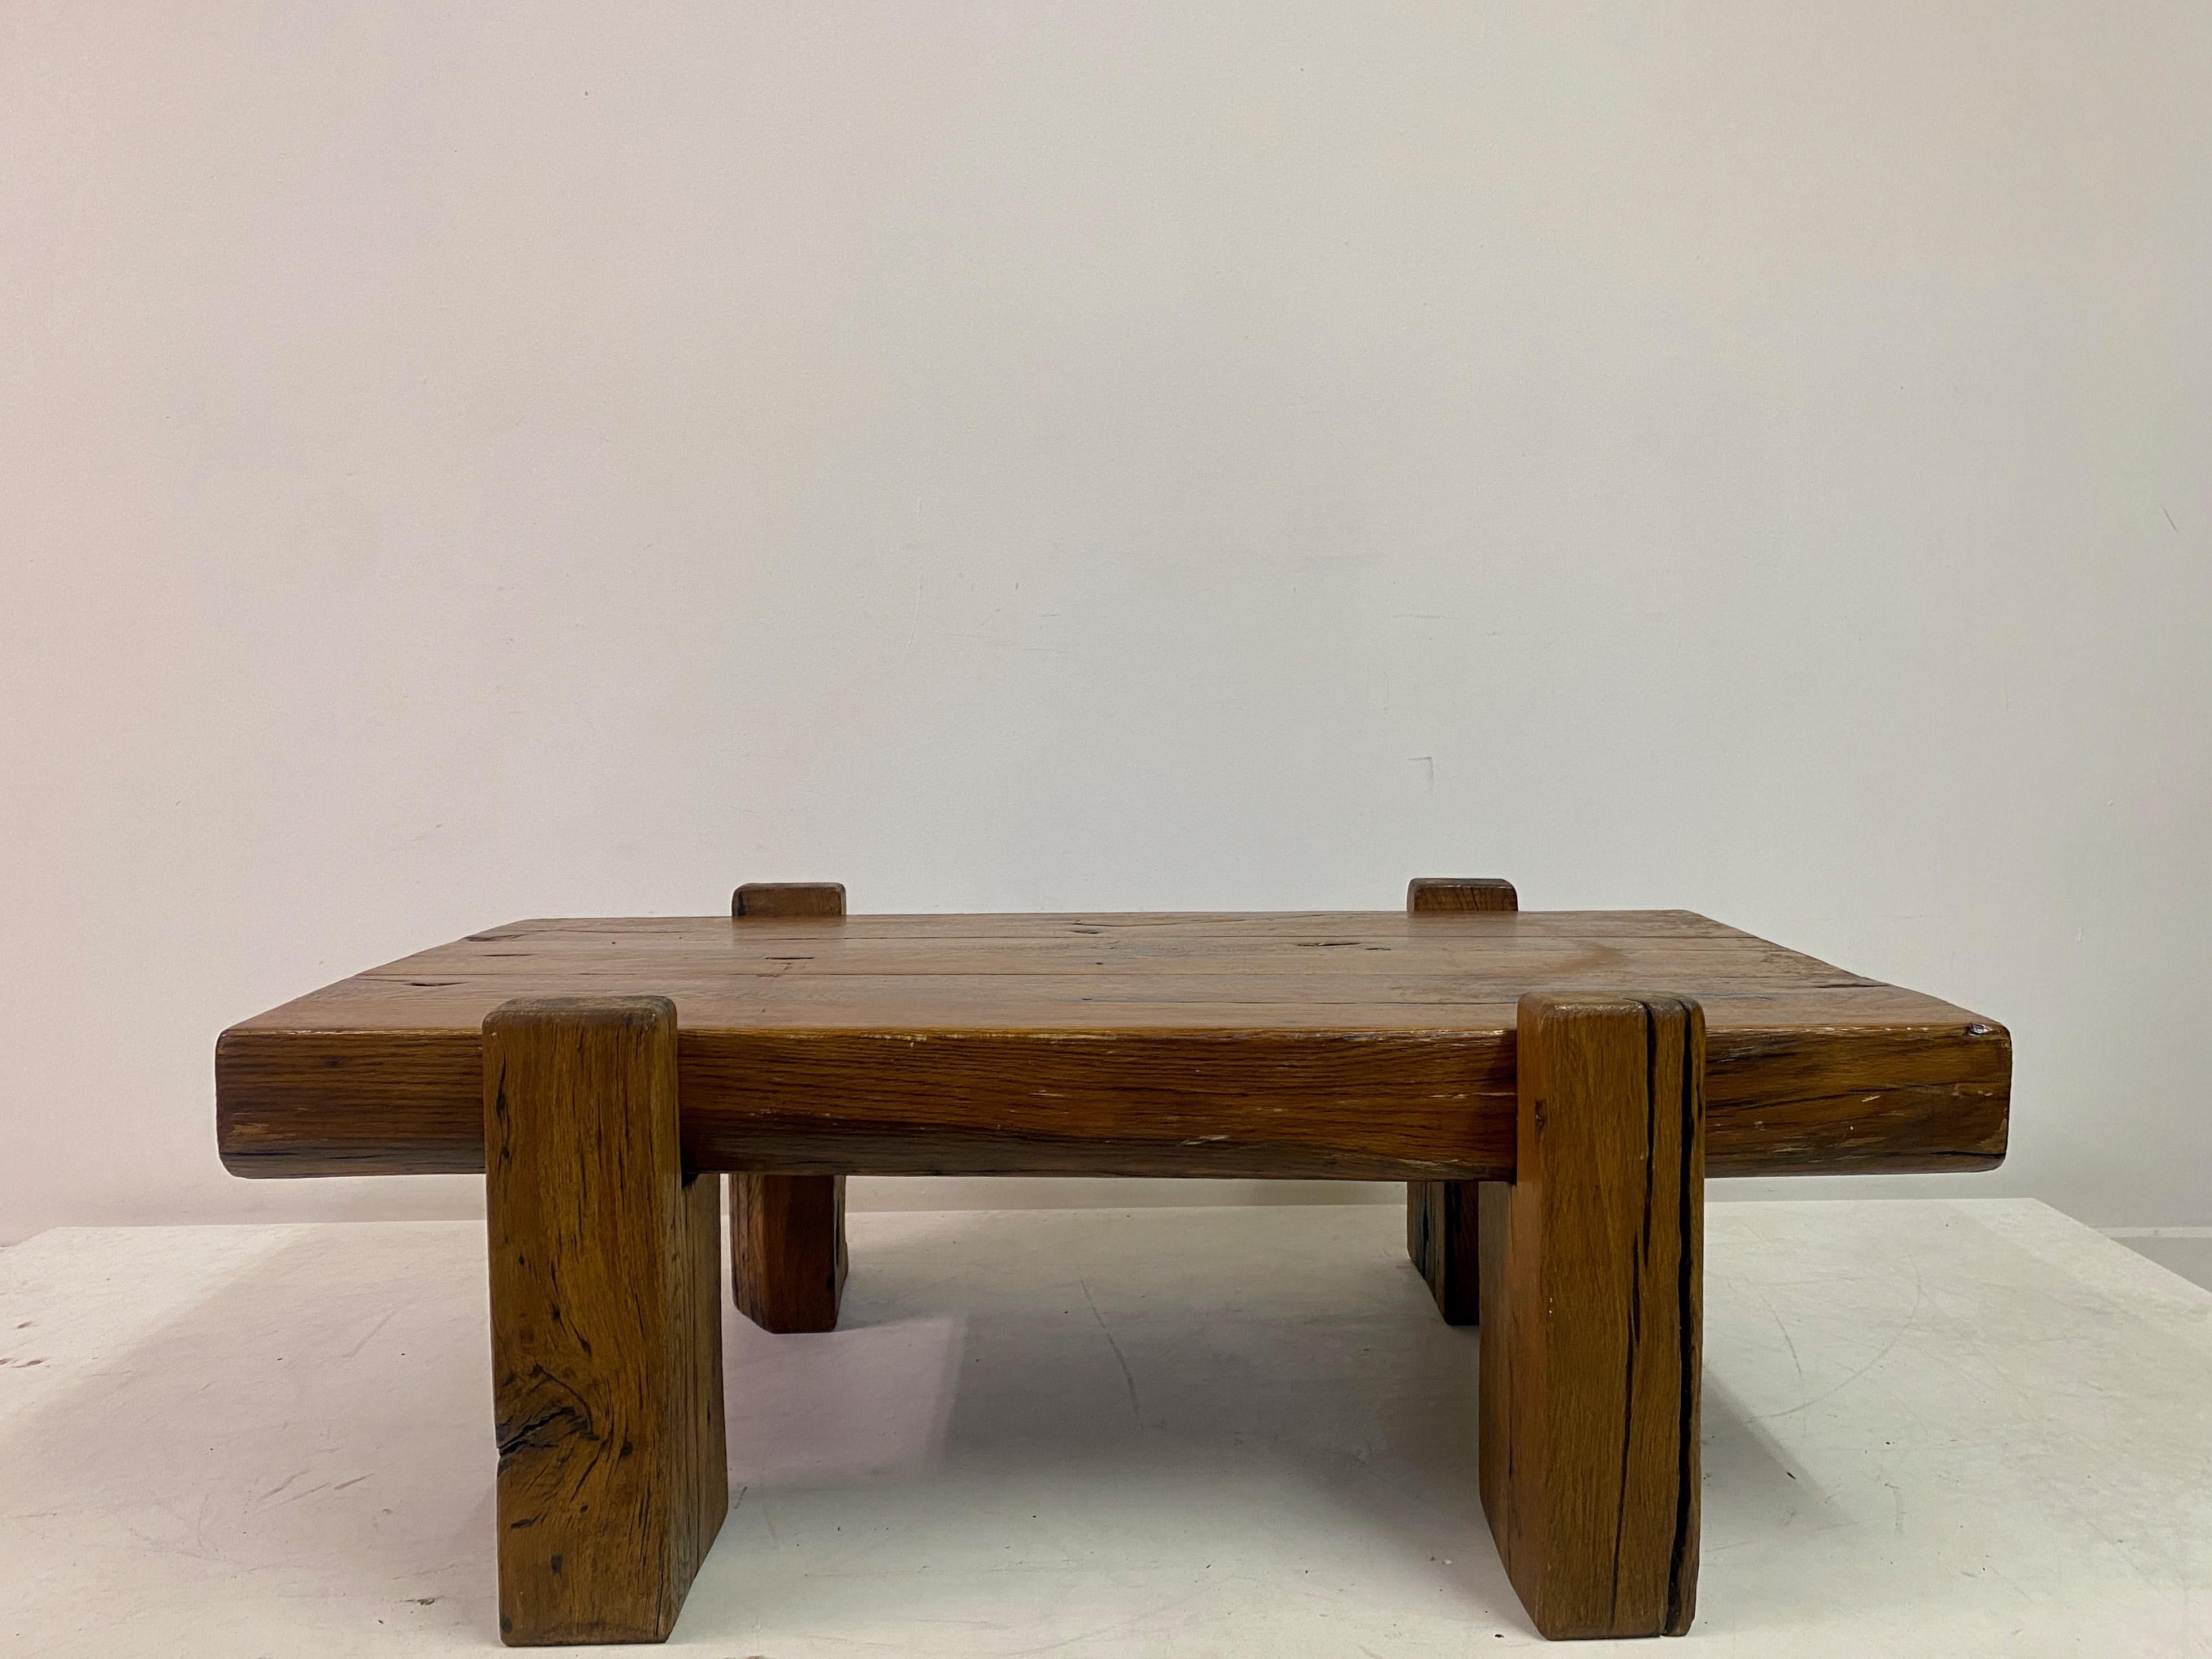 Coffee table

Rustic 

Handmade from reclaimed wood

Four rectangular legs with cut outs to support the top

Heavy three beam top

France 